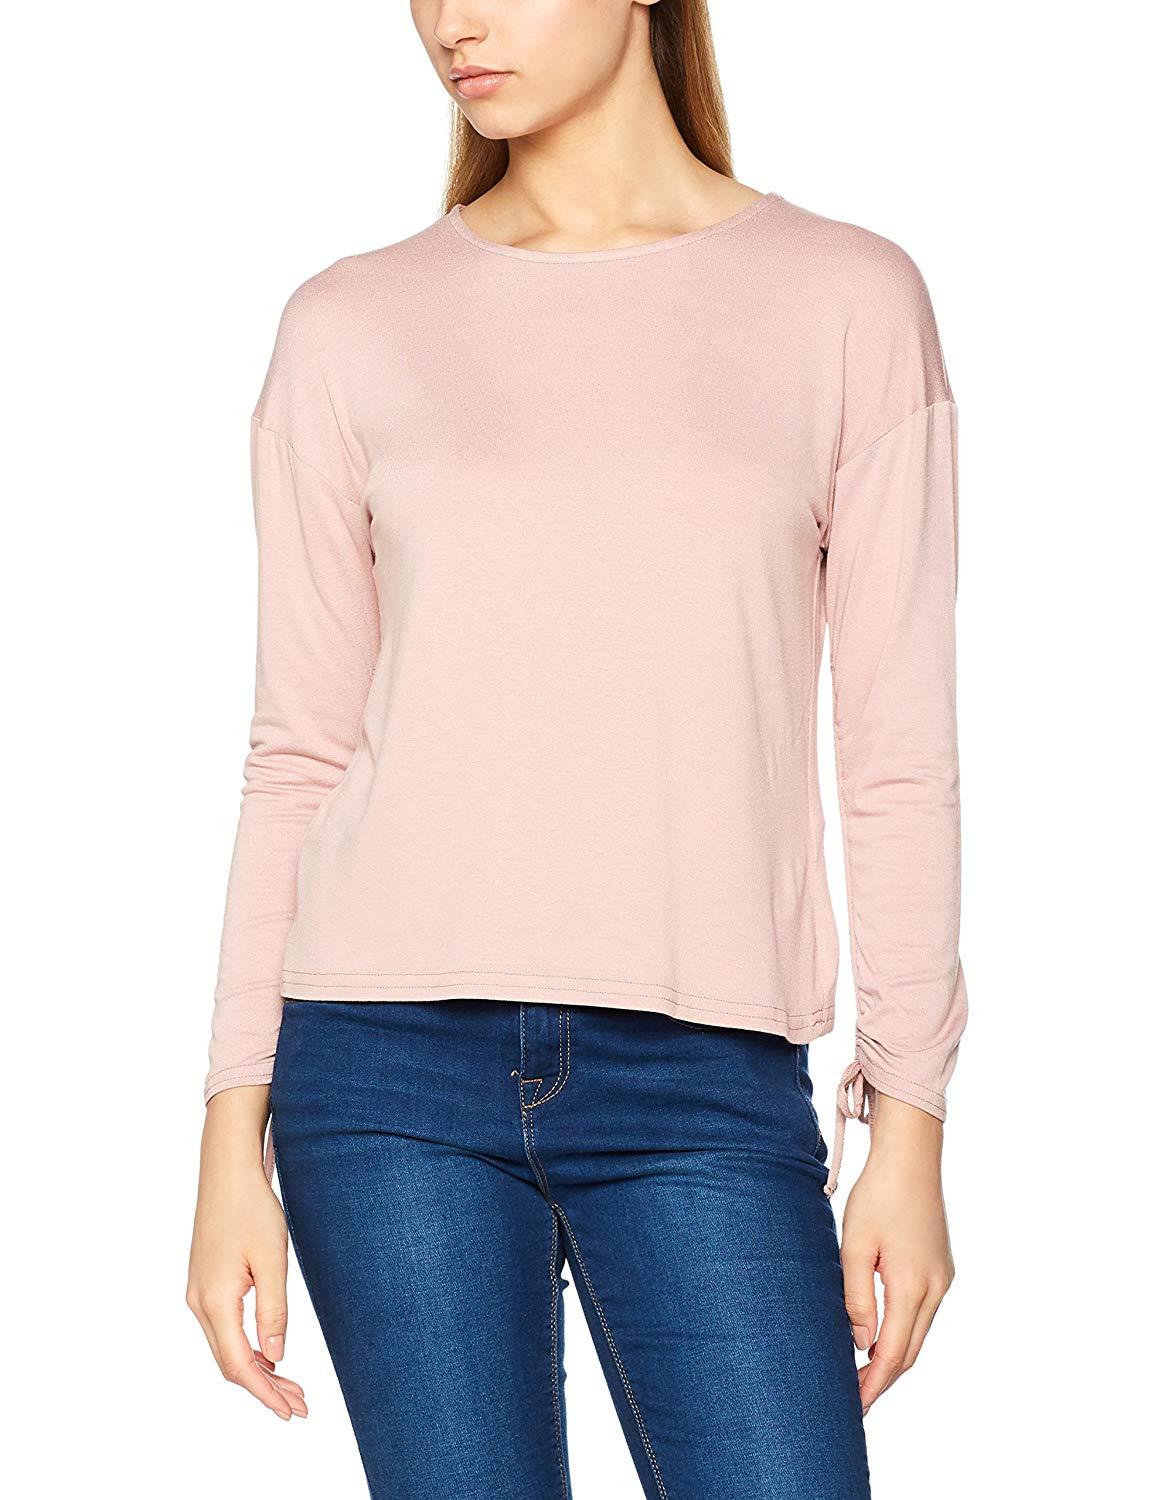 New Look Womens Ruche Pink Long Sleeve Top - Stockpoint Apparel Outlet